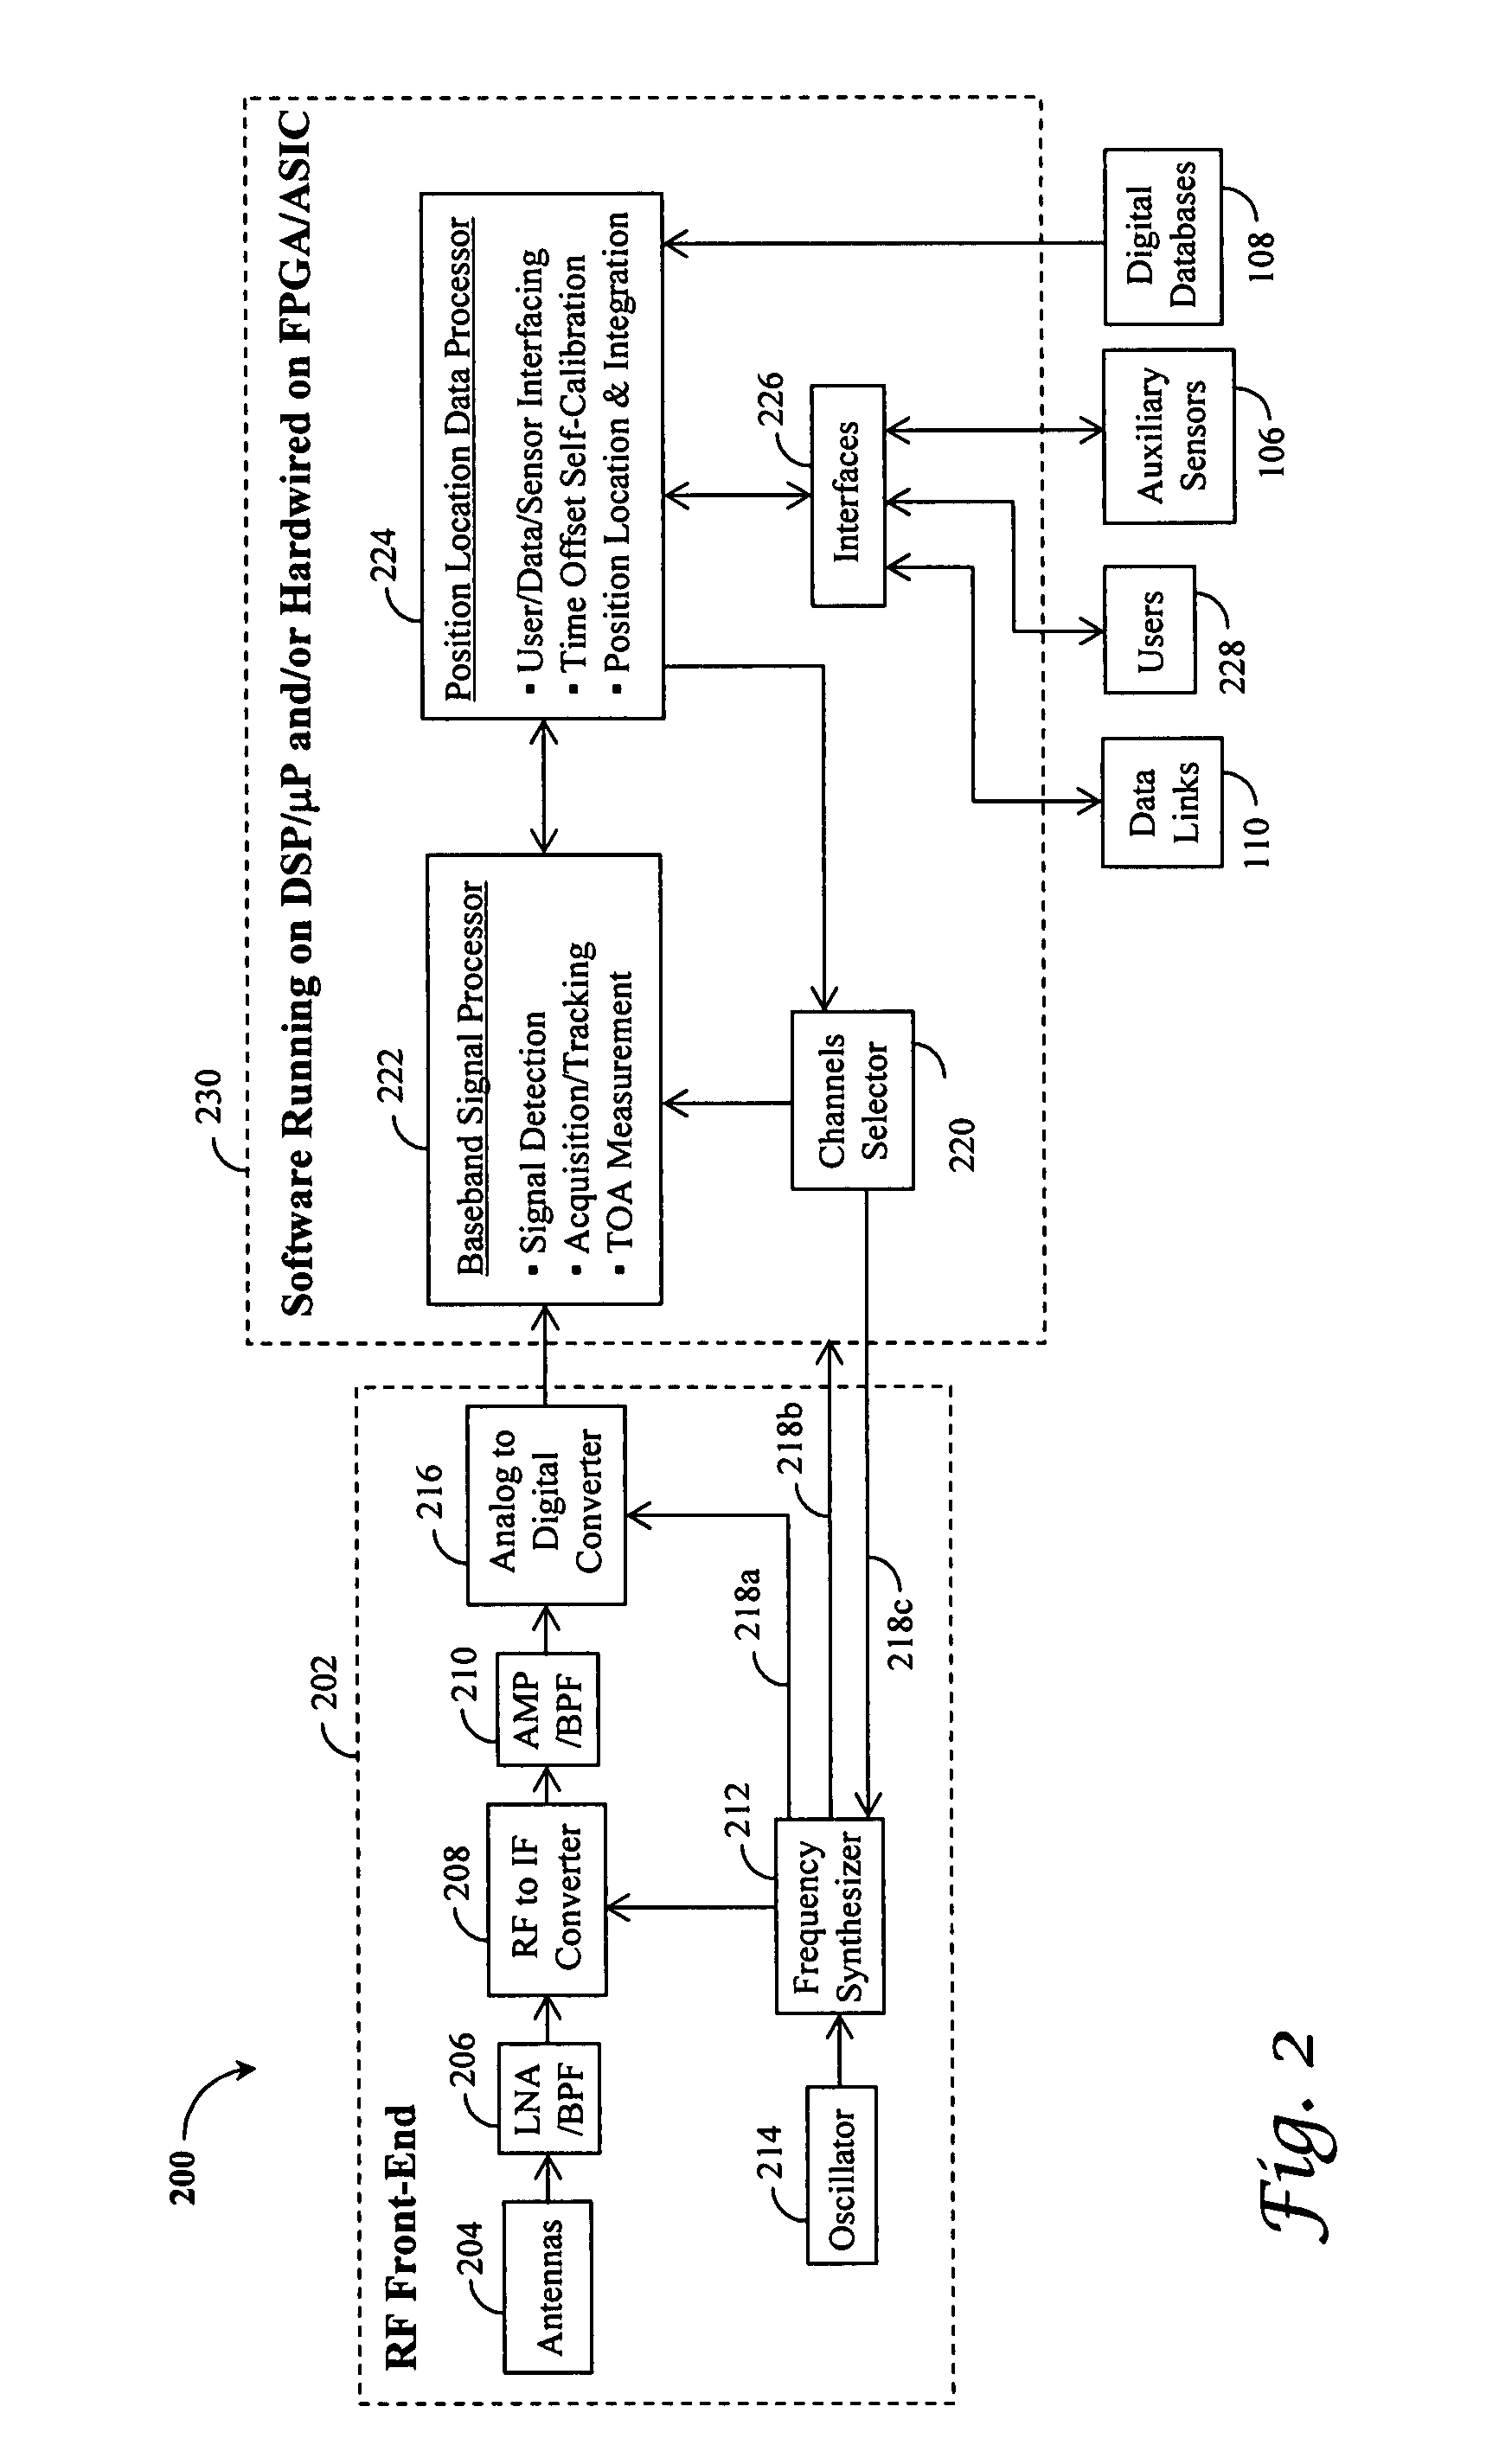 Self-calibrating position location using periodic codes in broadcast digital transmissions